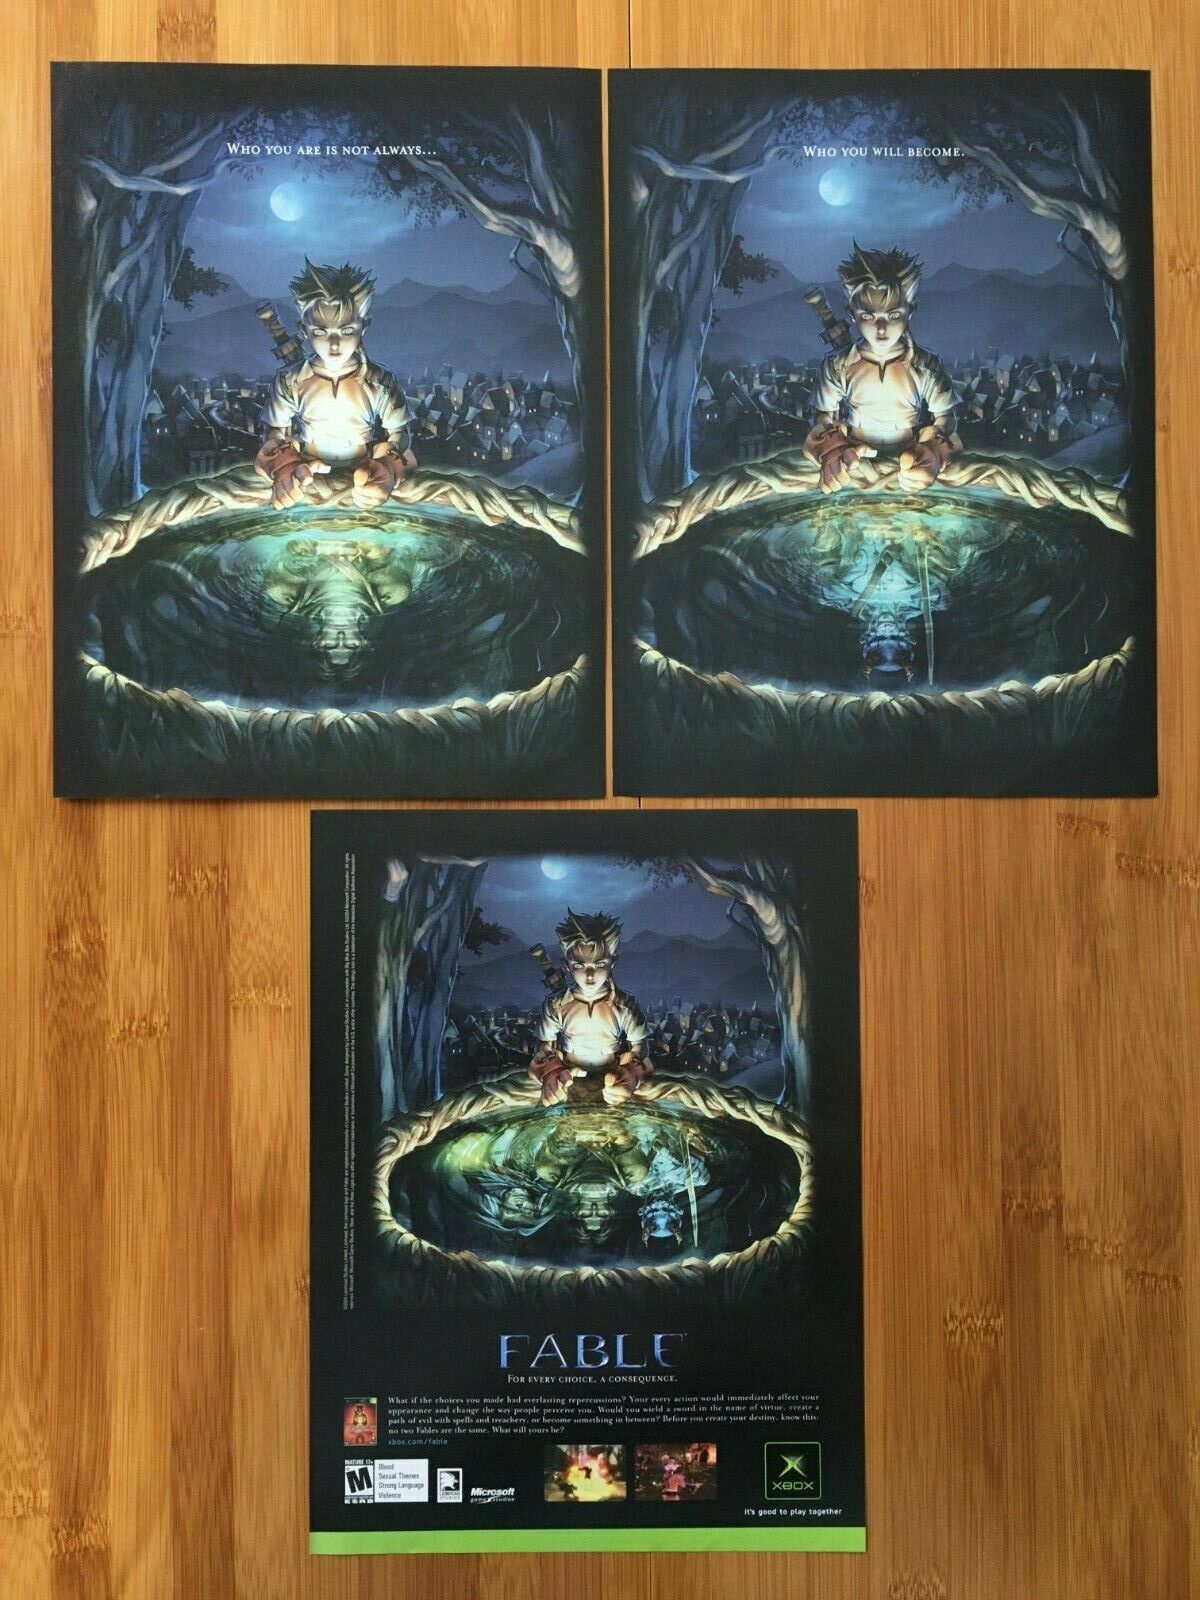 2004 Fable Xbox 360 3-PAGE Print Ad/Poster Official Original RPG Game Promo Art